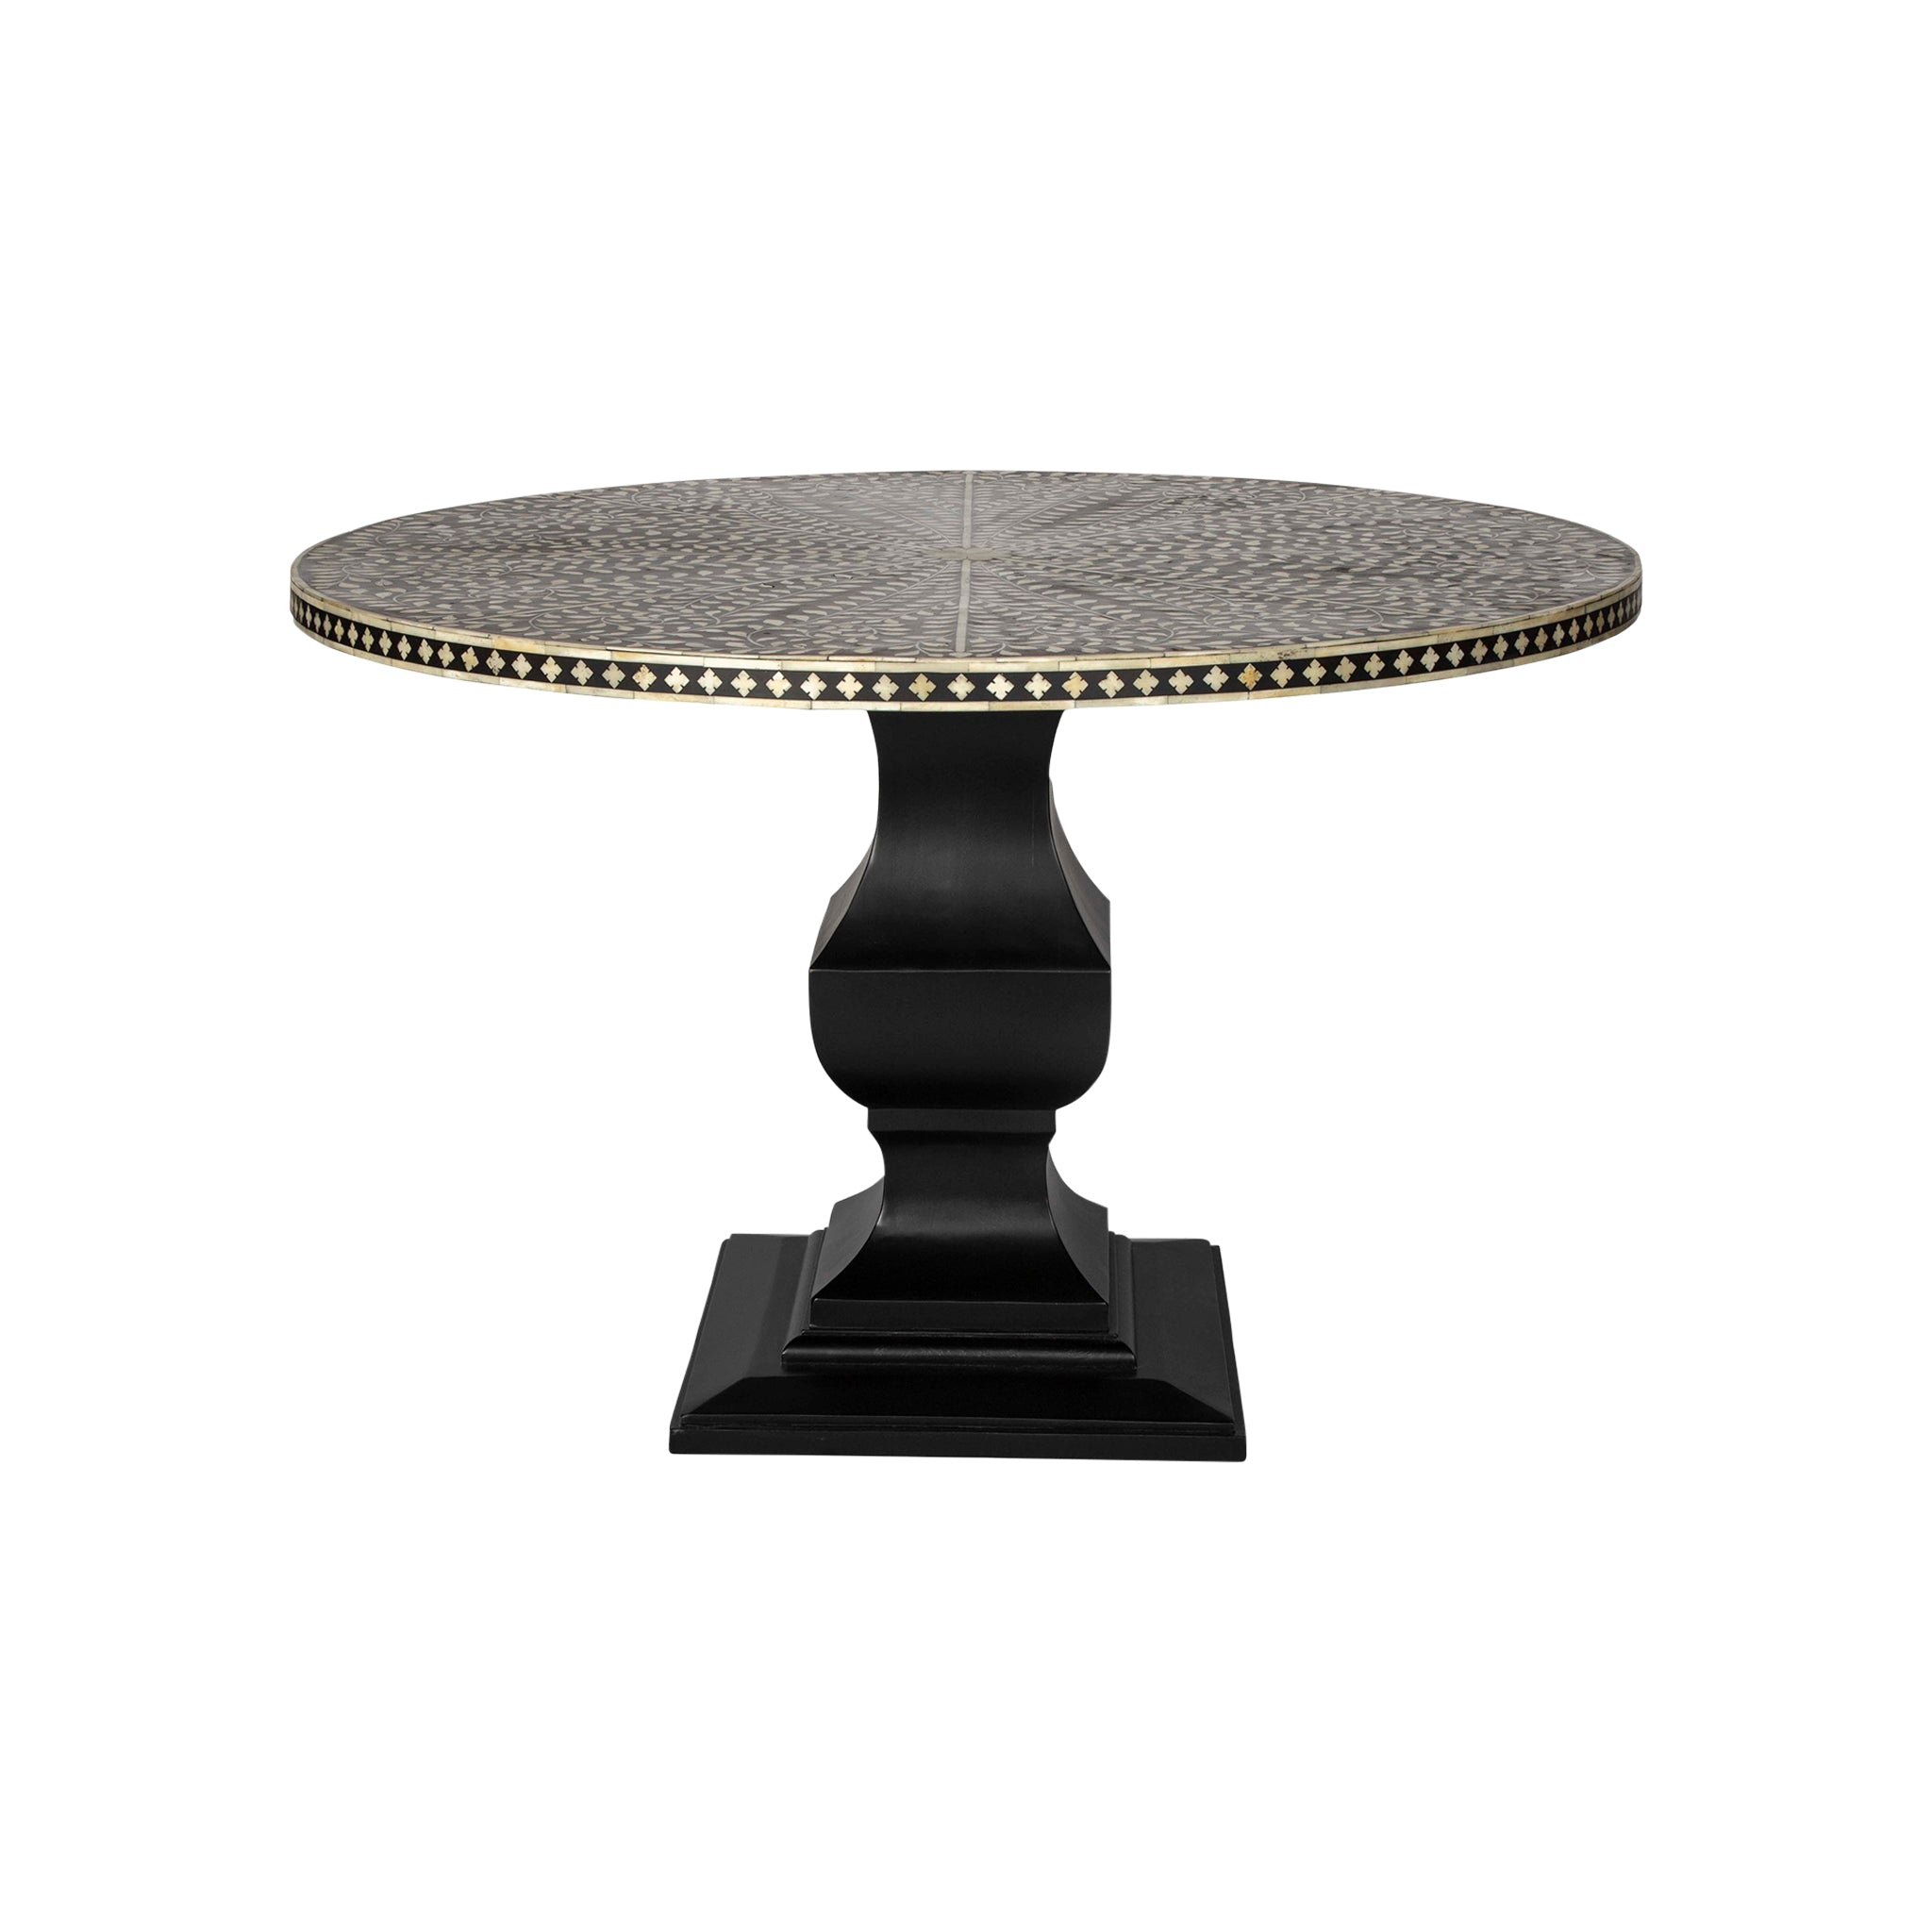 Slightly Elevated Front View of the Moorish Dining Table on a White Background